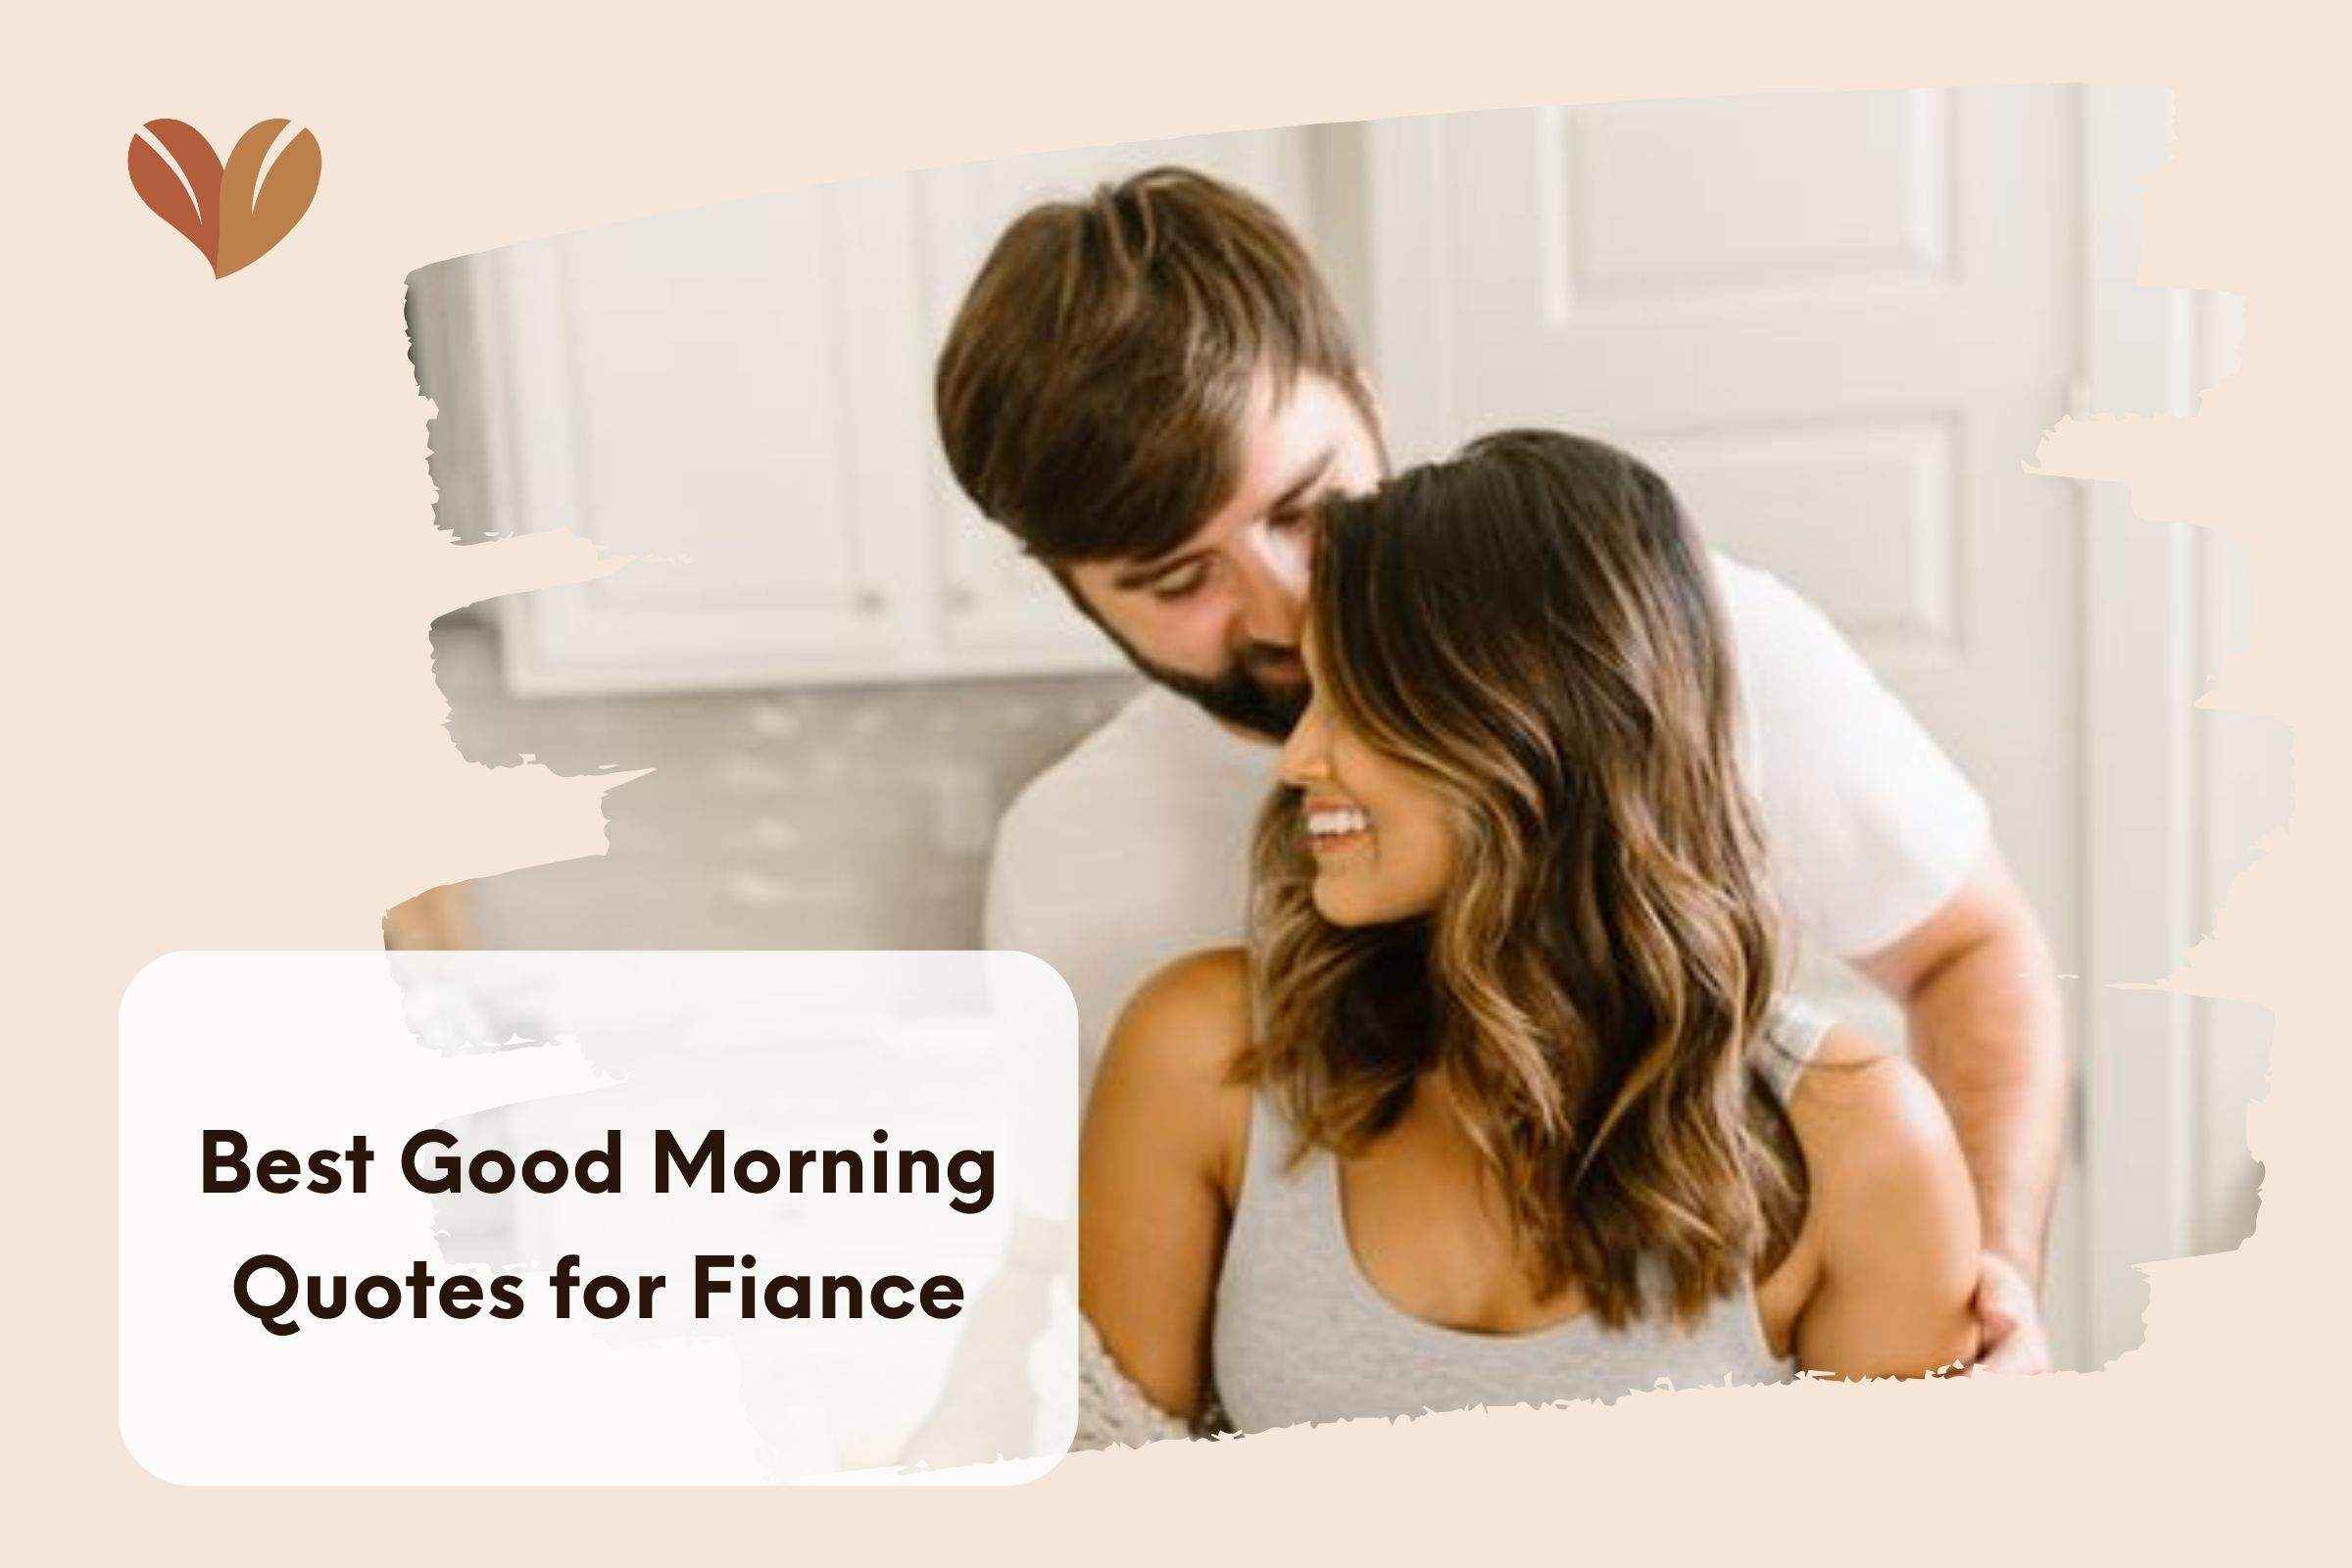 Best Good Morning Quotes for Fiance